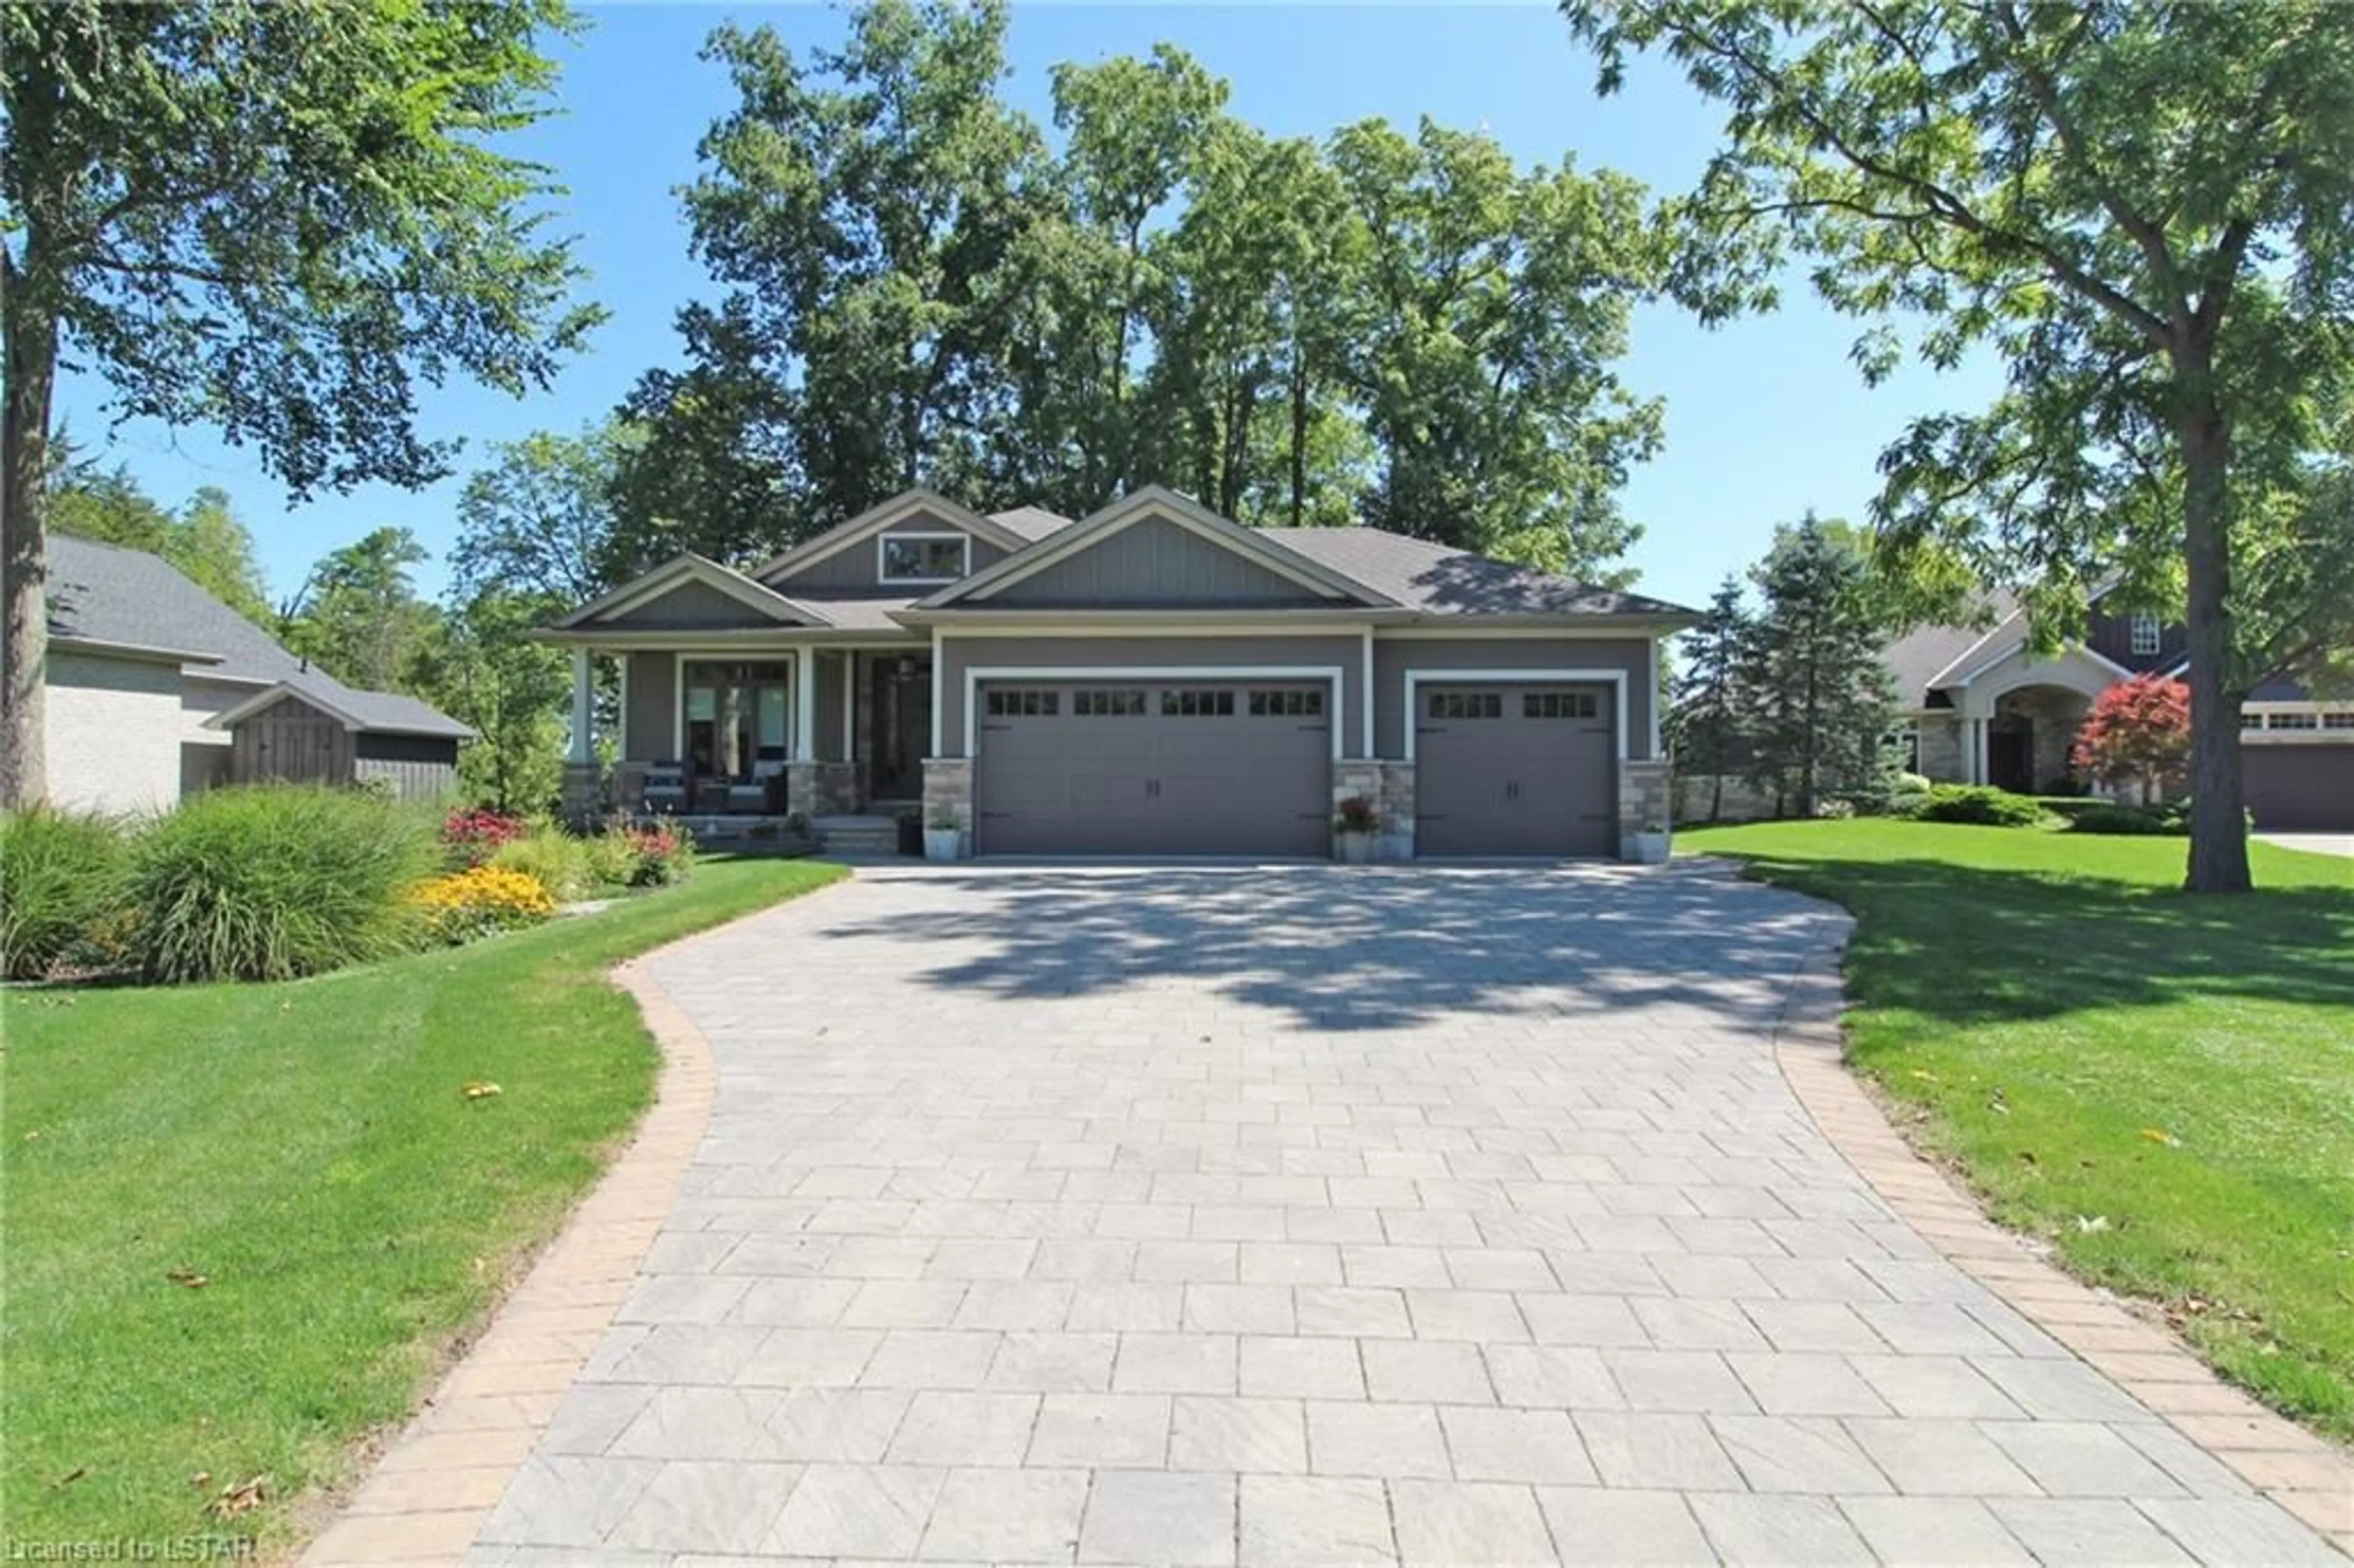 Home with brick exterior material for 10138 Merrywood Dr, Grand Bend Ontario N0M 1T0